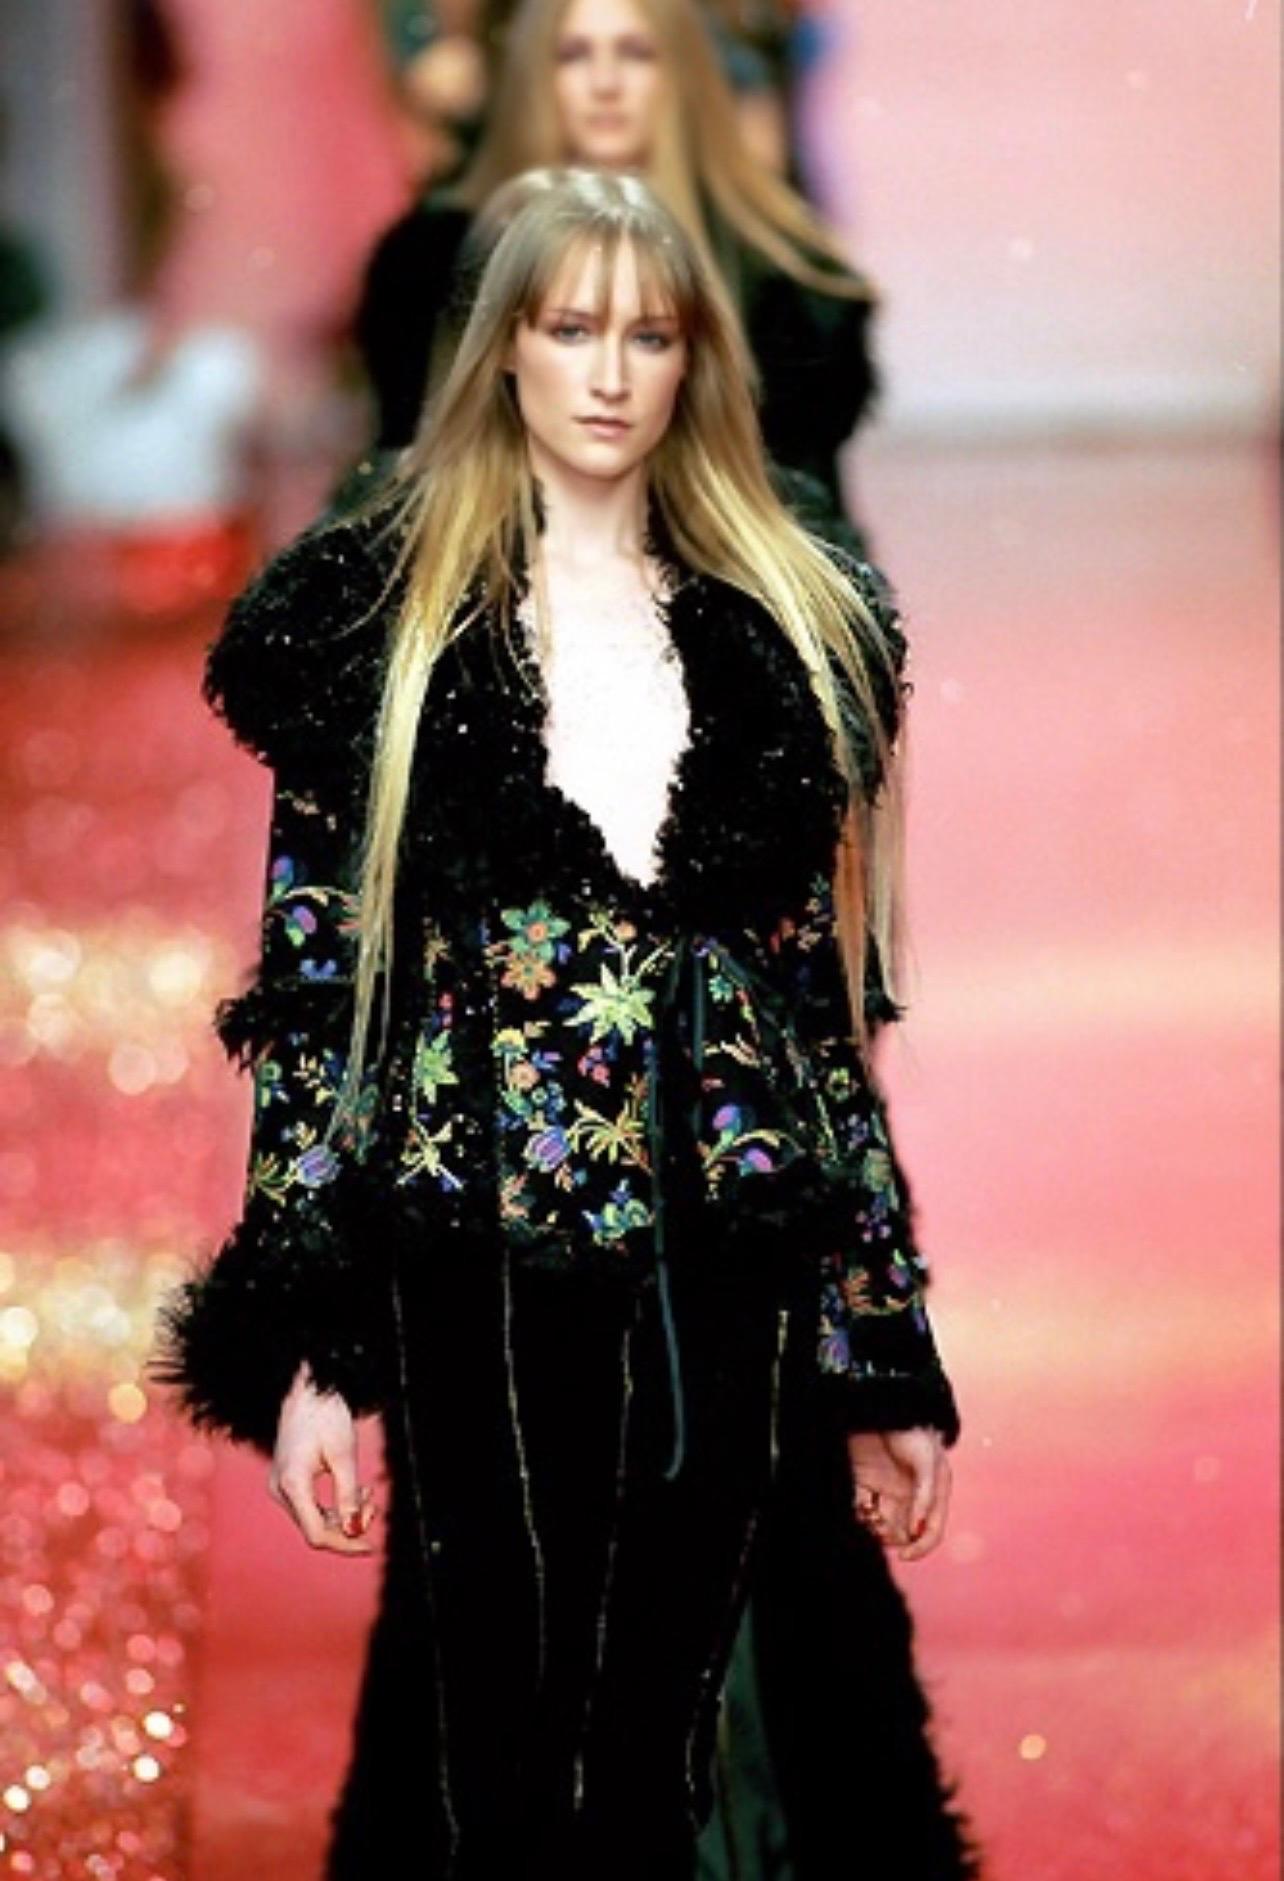 QV Archive presents:
Not to miss, an ultra rare genuine shearling coat from a master of luxury furs and leathers, Roberto Cavalli.

The jacket is partially hand-stitched and fully hand-painted with gorgeous, shimmery flower motives, making it a